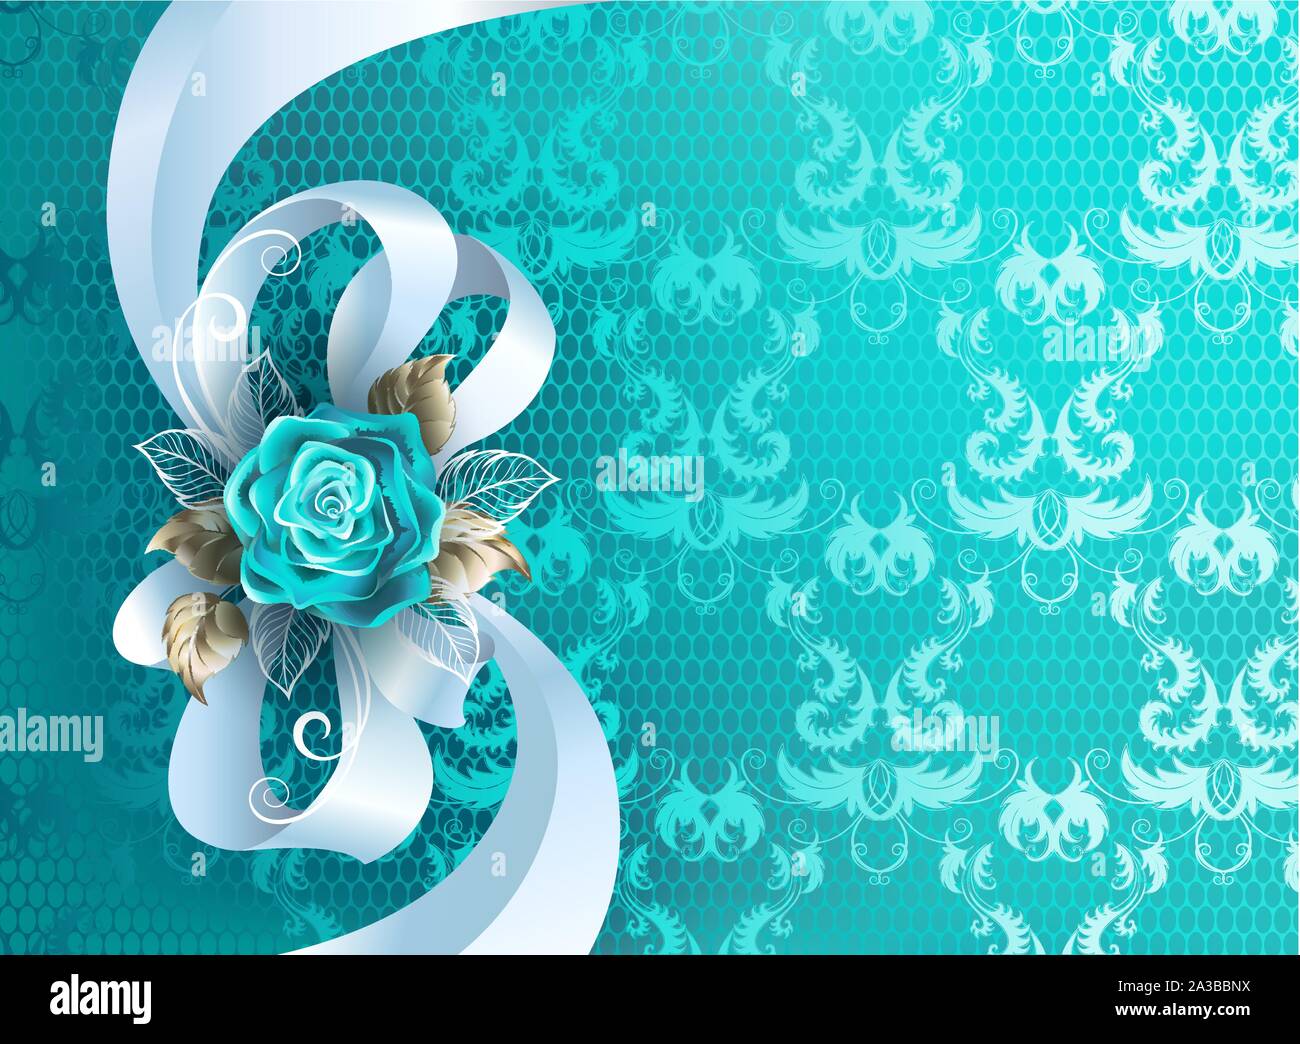 White silk bow decorated with turquoise rose with leaves of white gold on turquoise, lace background. Stock Vector